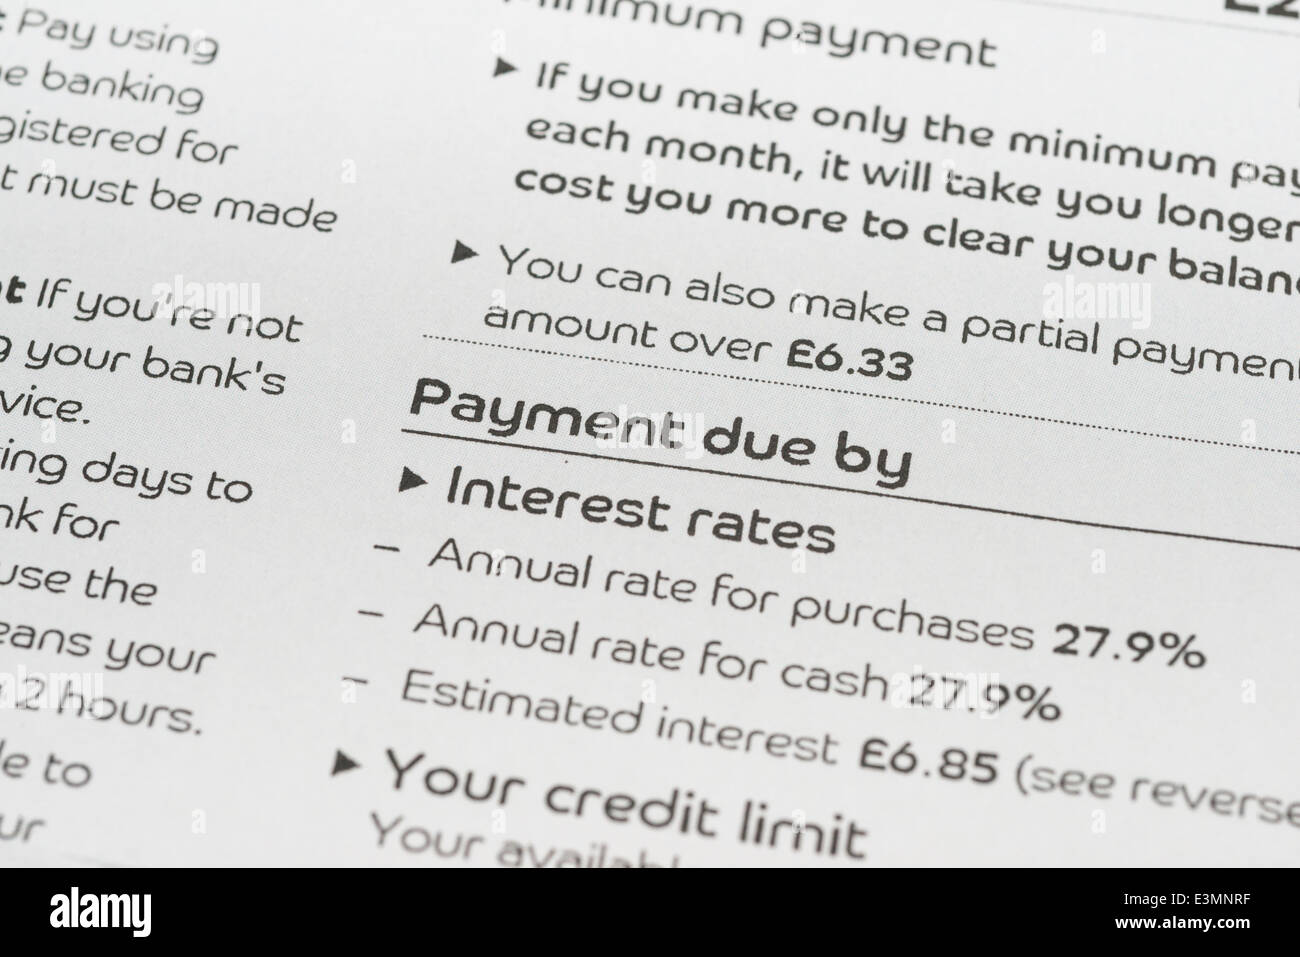 Payment information on a credit card statement Stock Photo